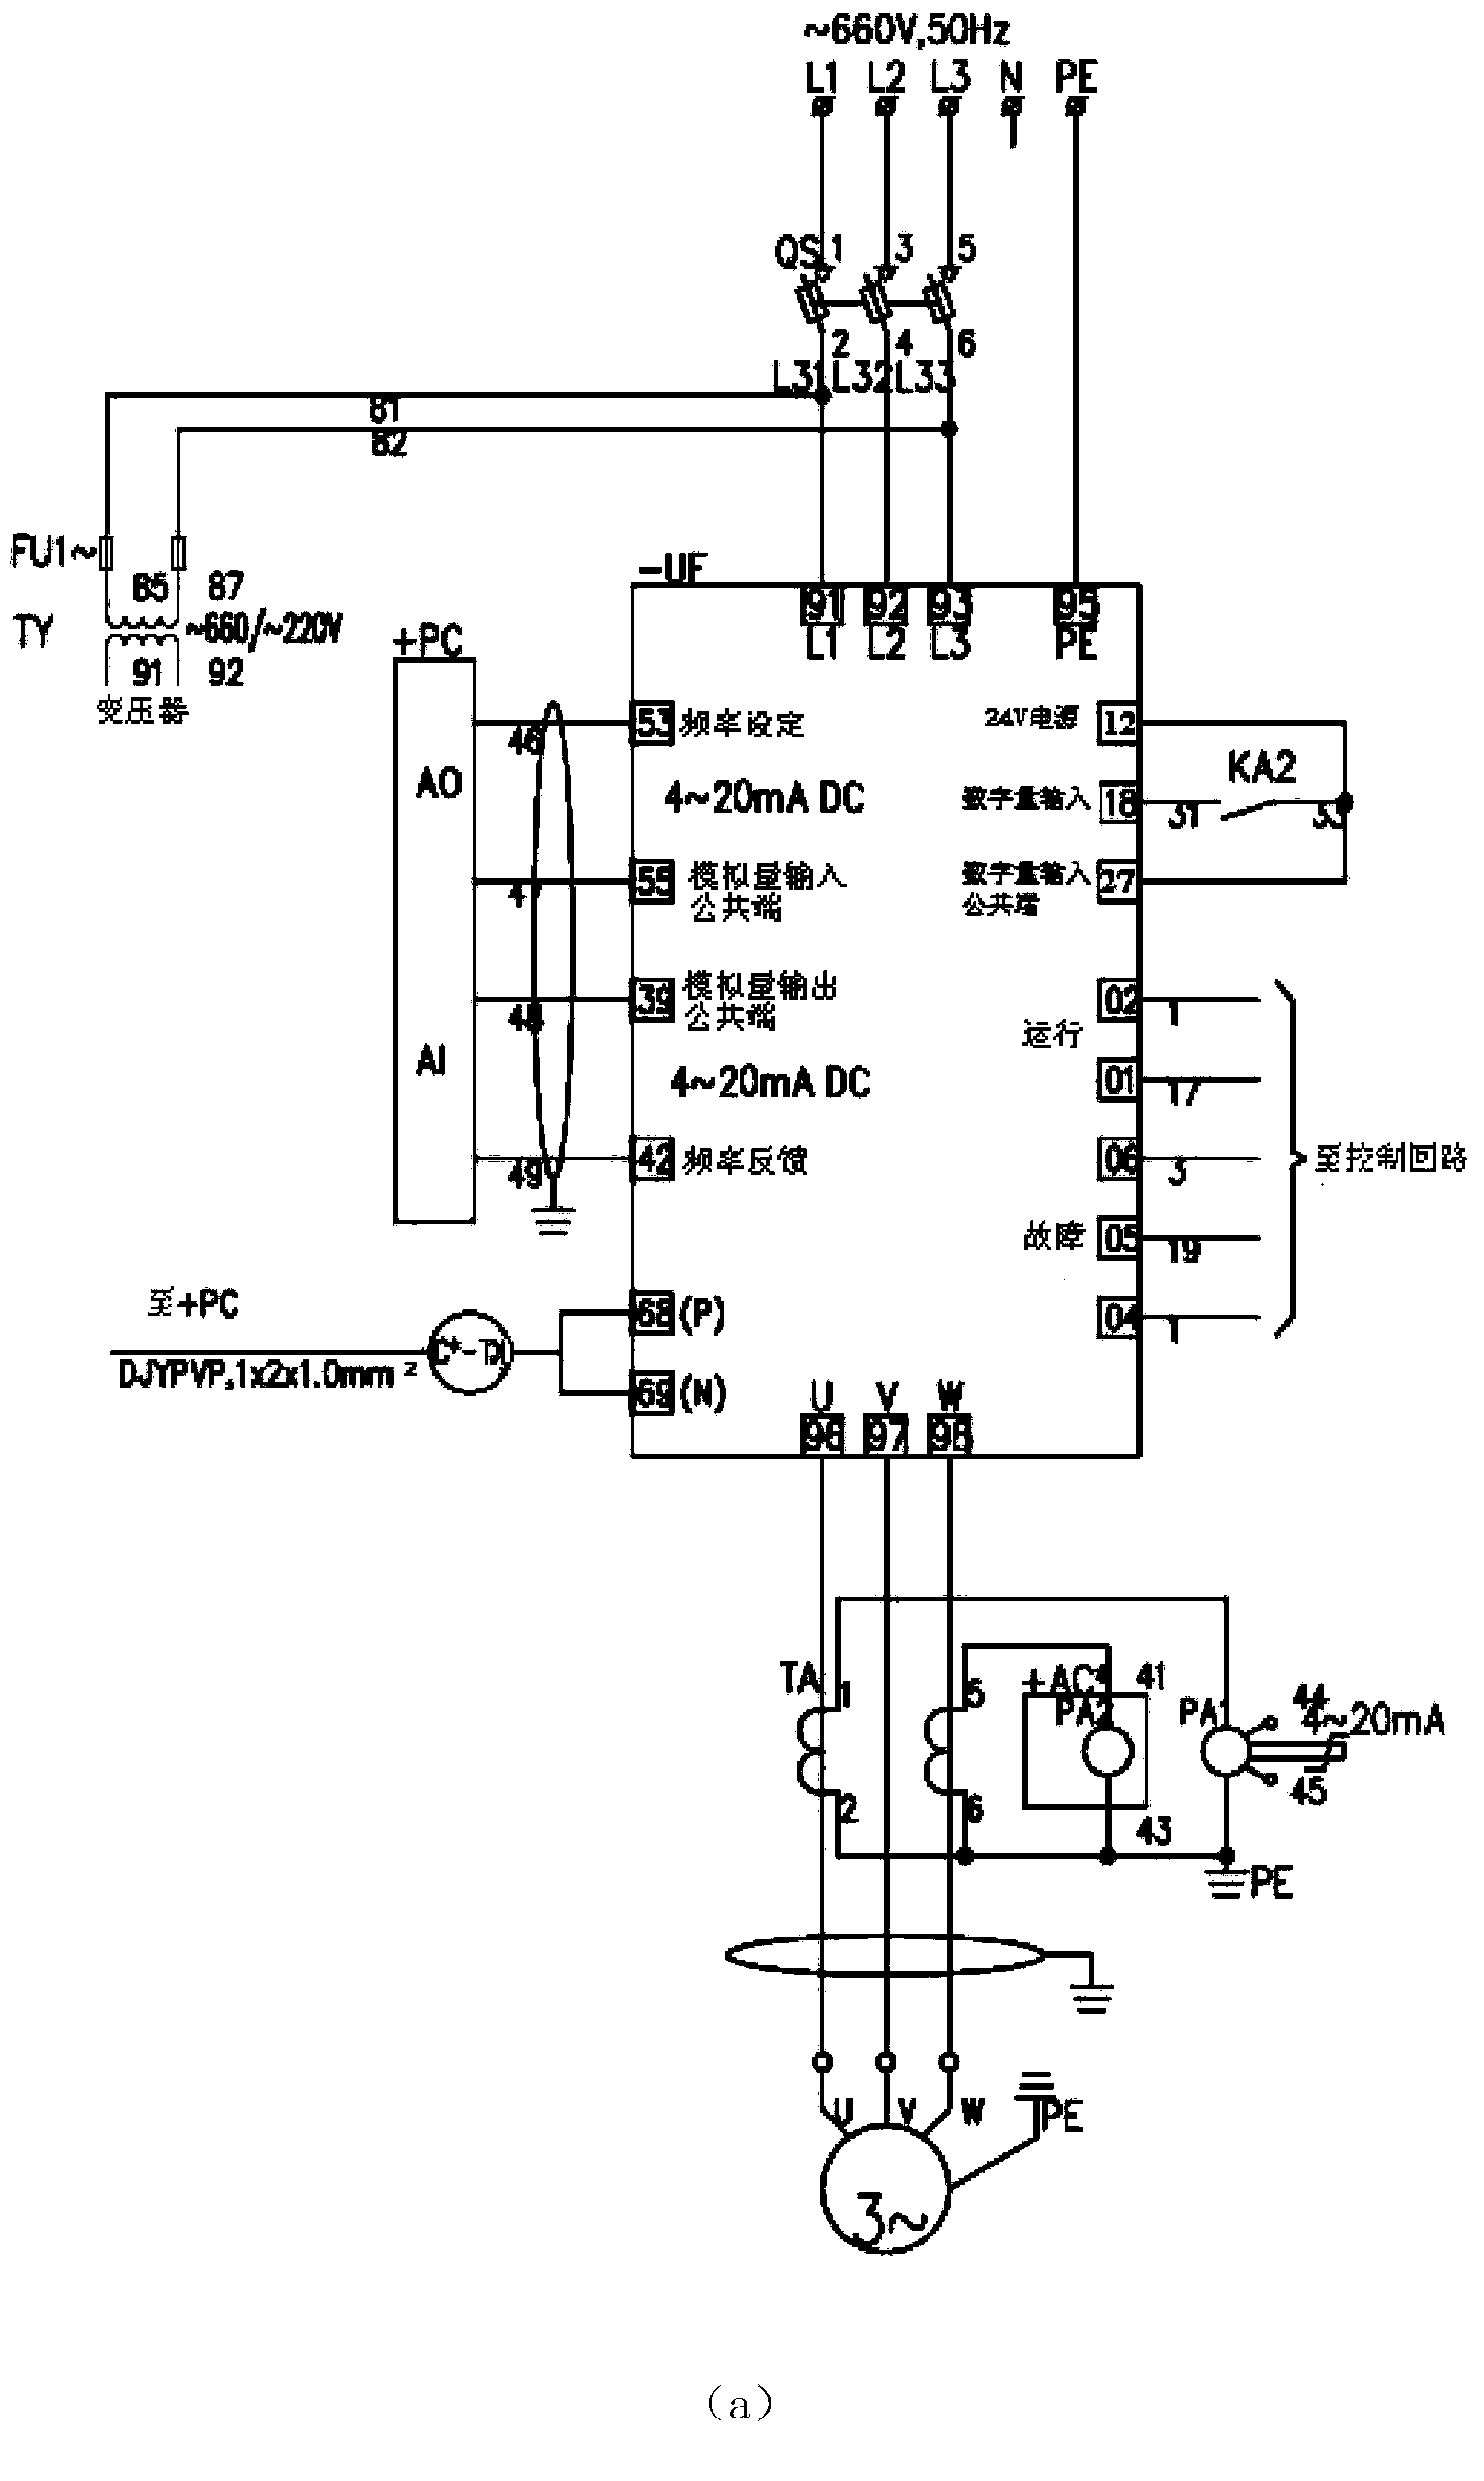 Device logic control method based on programmable logic controller (PLC)/distributed control system (DCS)